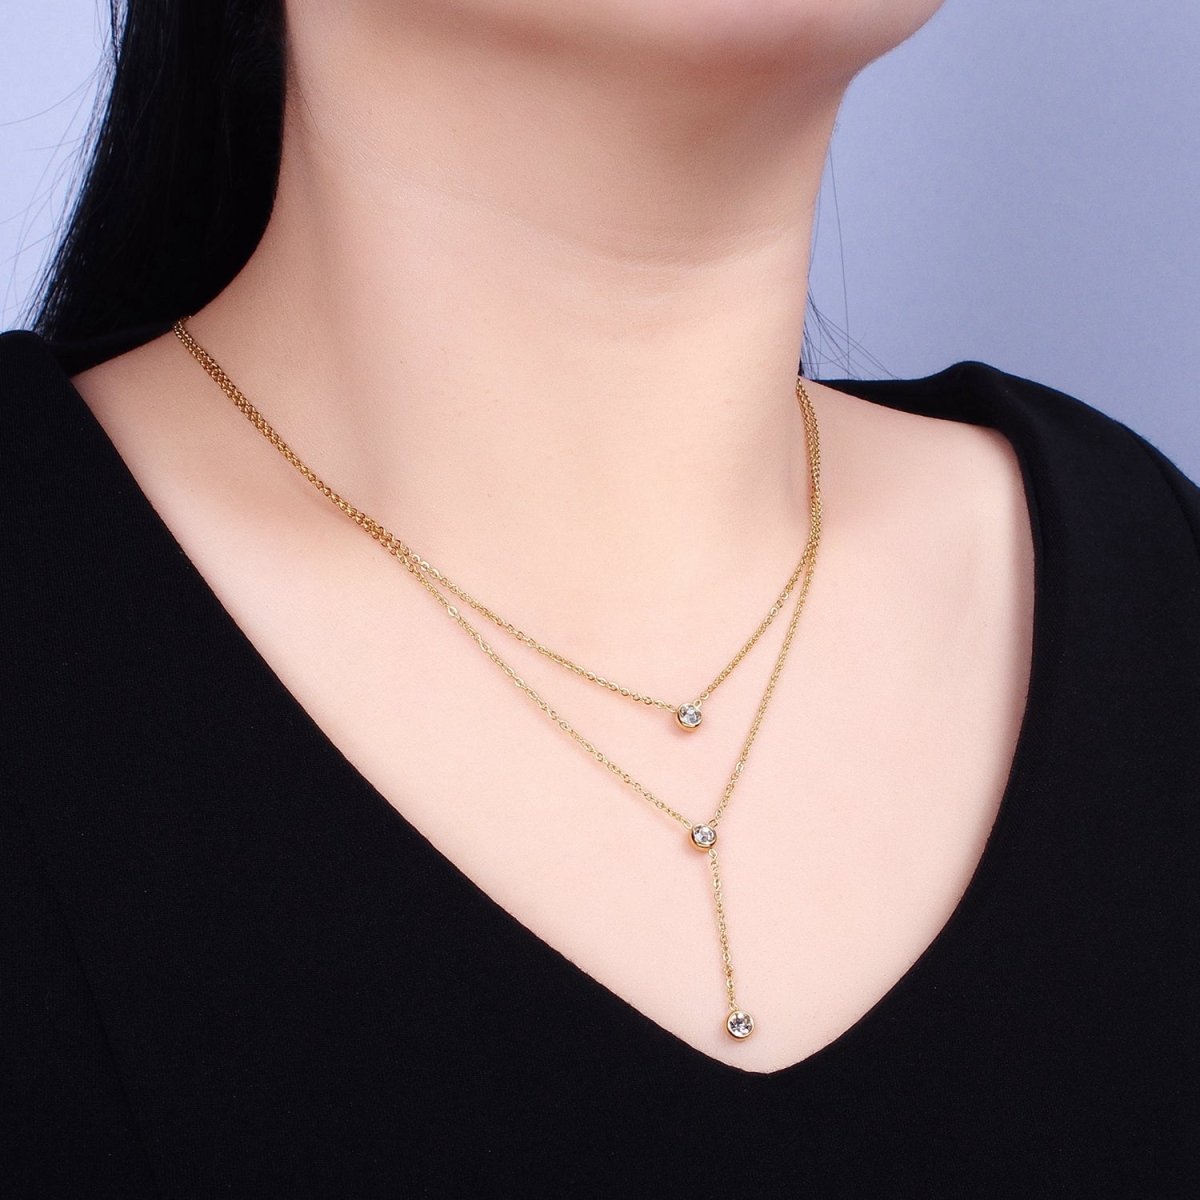 Double Layer Lariat Chain Necklace In Stainless Steel 24K Gold with CZ Stone | WA-1715 WA-1716 Clearance Pricing - DLUXCA